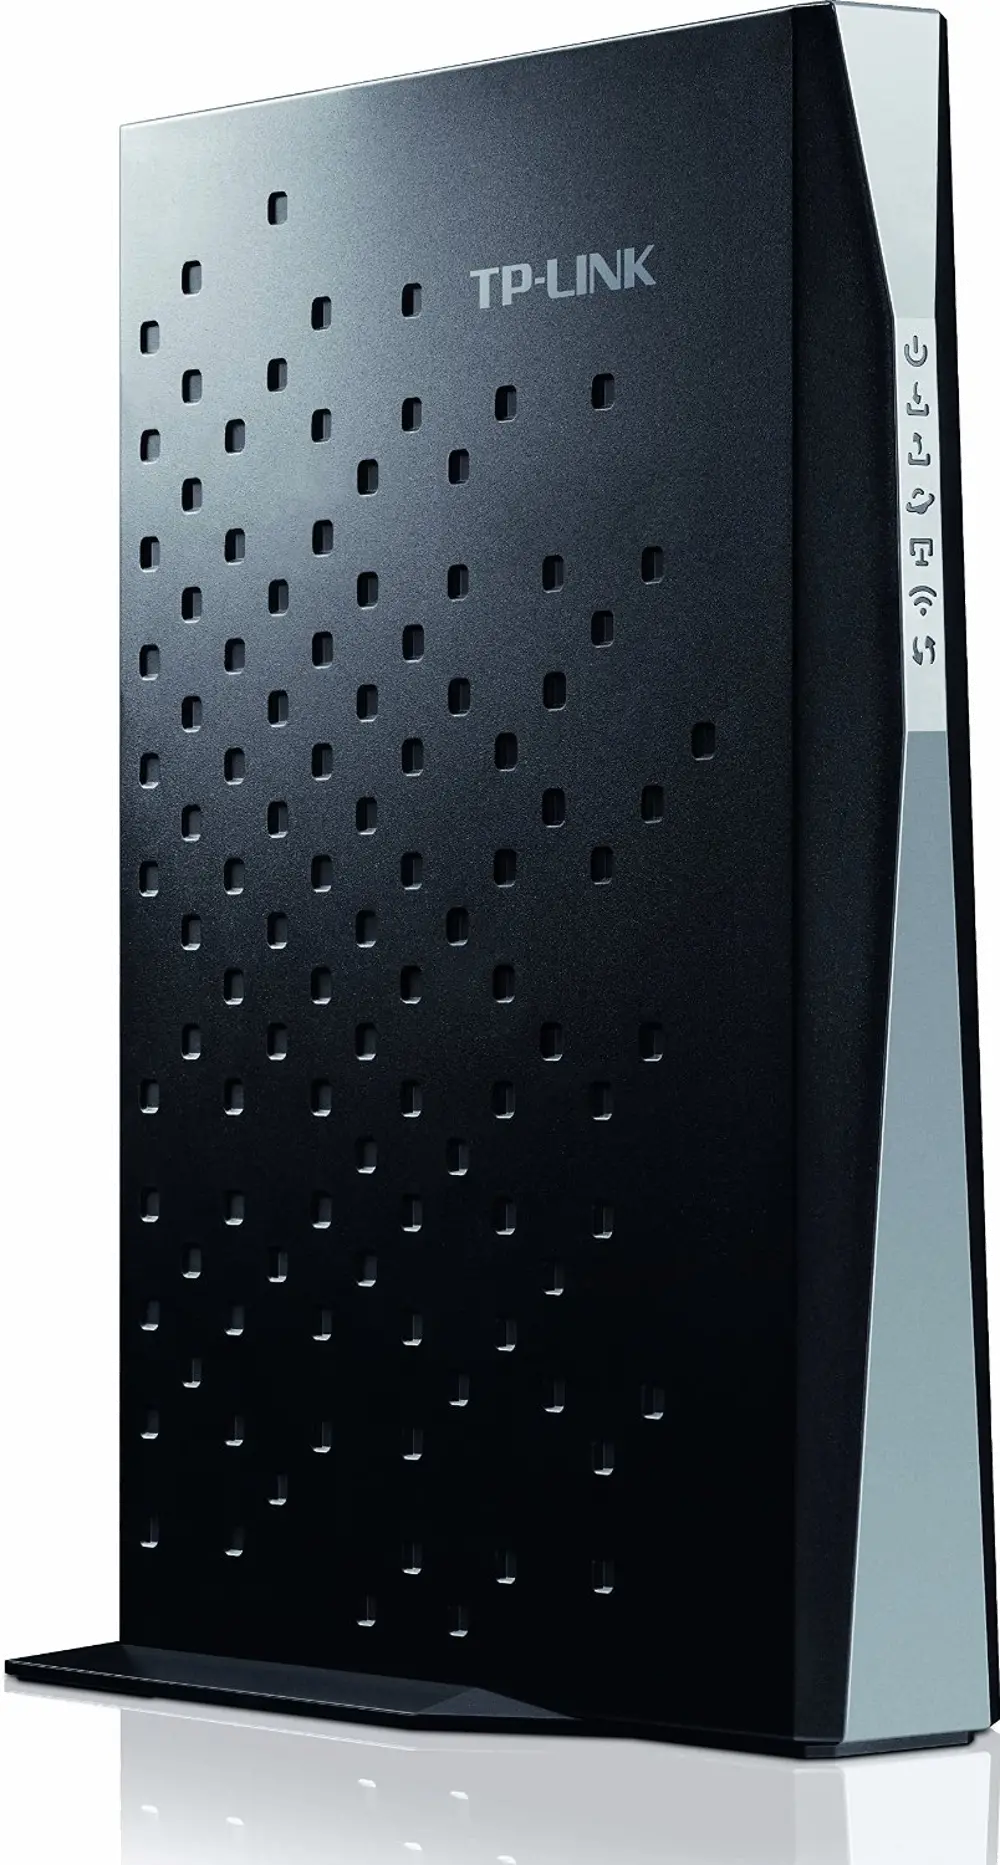 TP-ARCH-CR700/CBL-RT TP-Link AC1750 Wireless Dual Band DOCSIS 3.0 Cable Modem Router-1